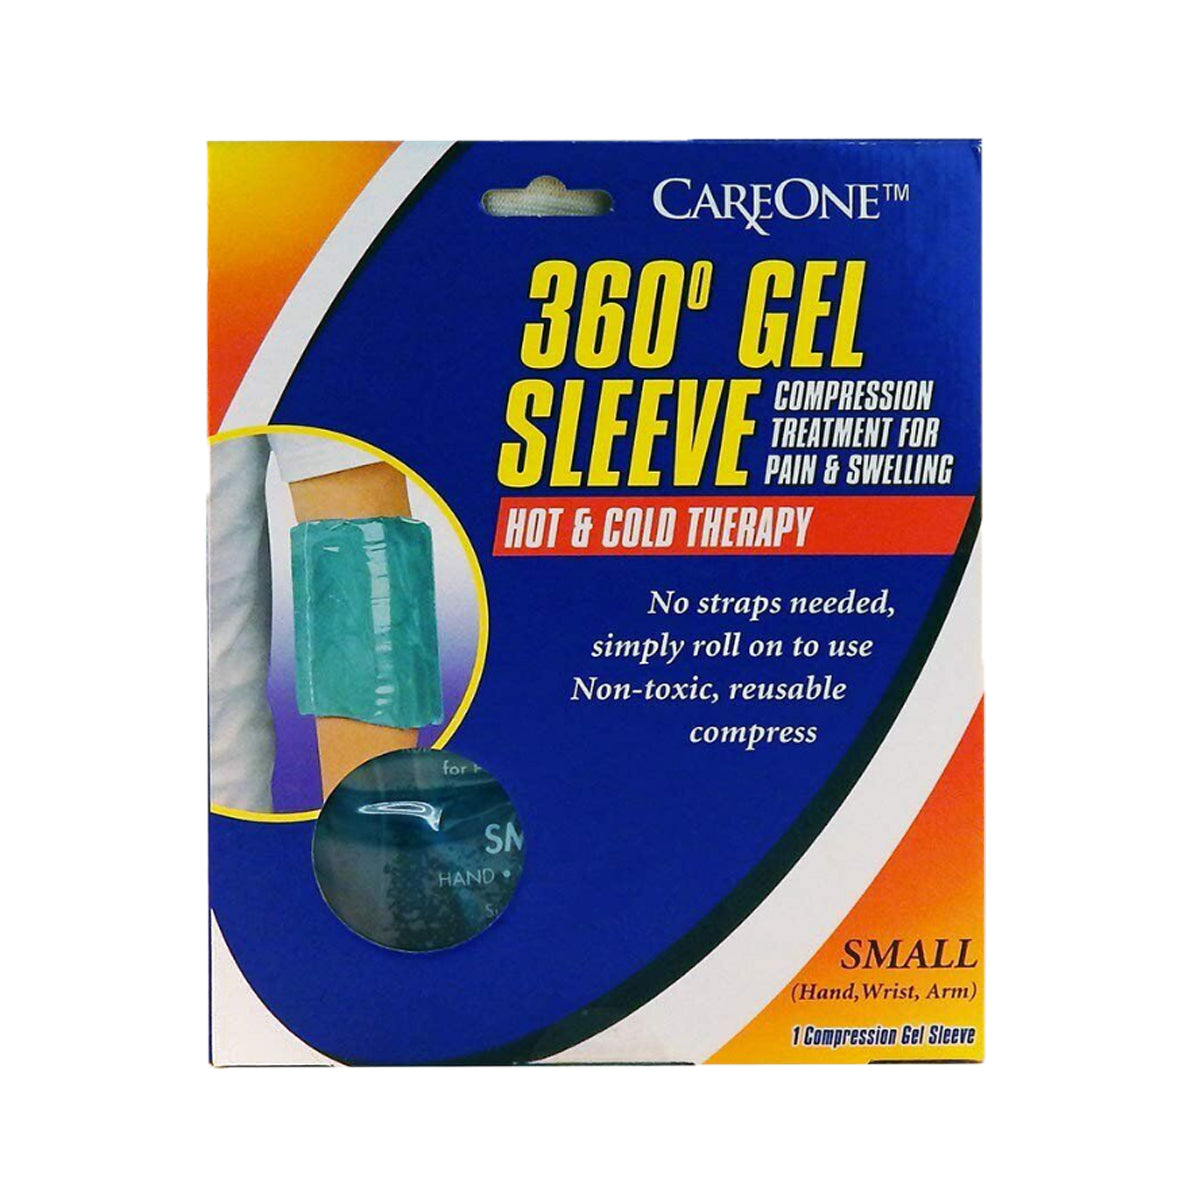 360° Gel Sleeve Hot & Cold Compress Therapy, Small - Treats Hand, Wrist, Arm